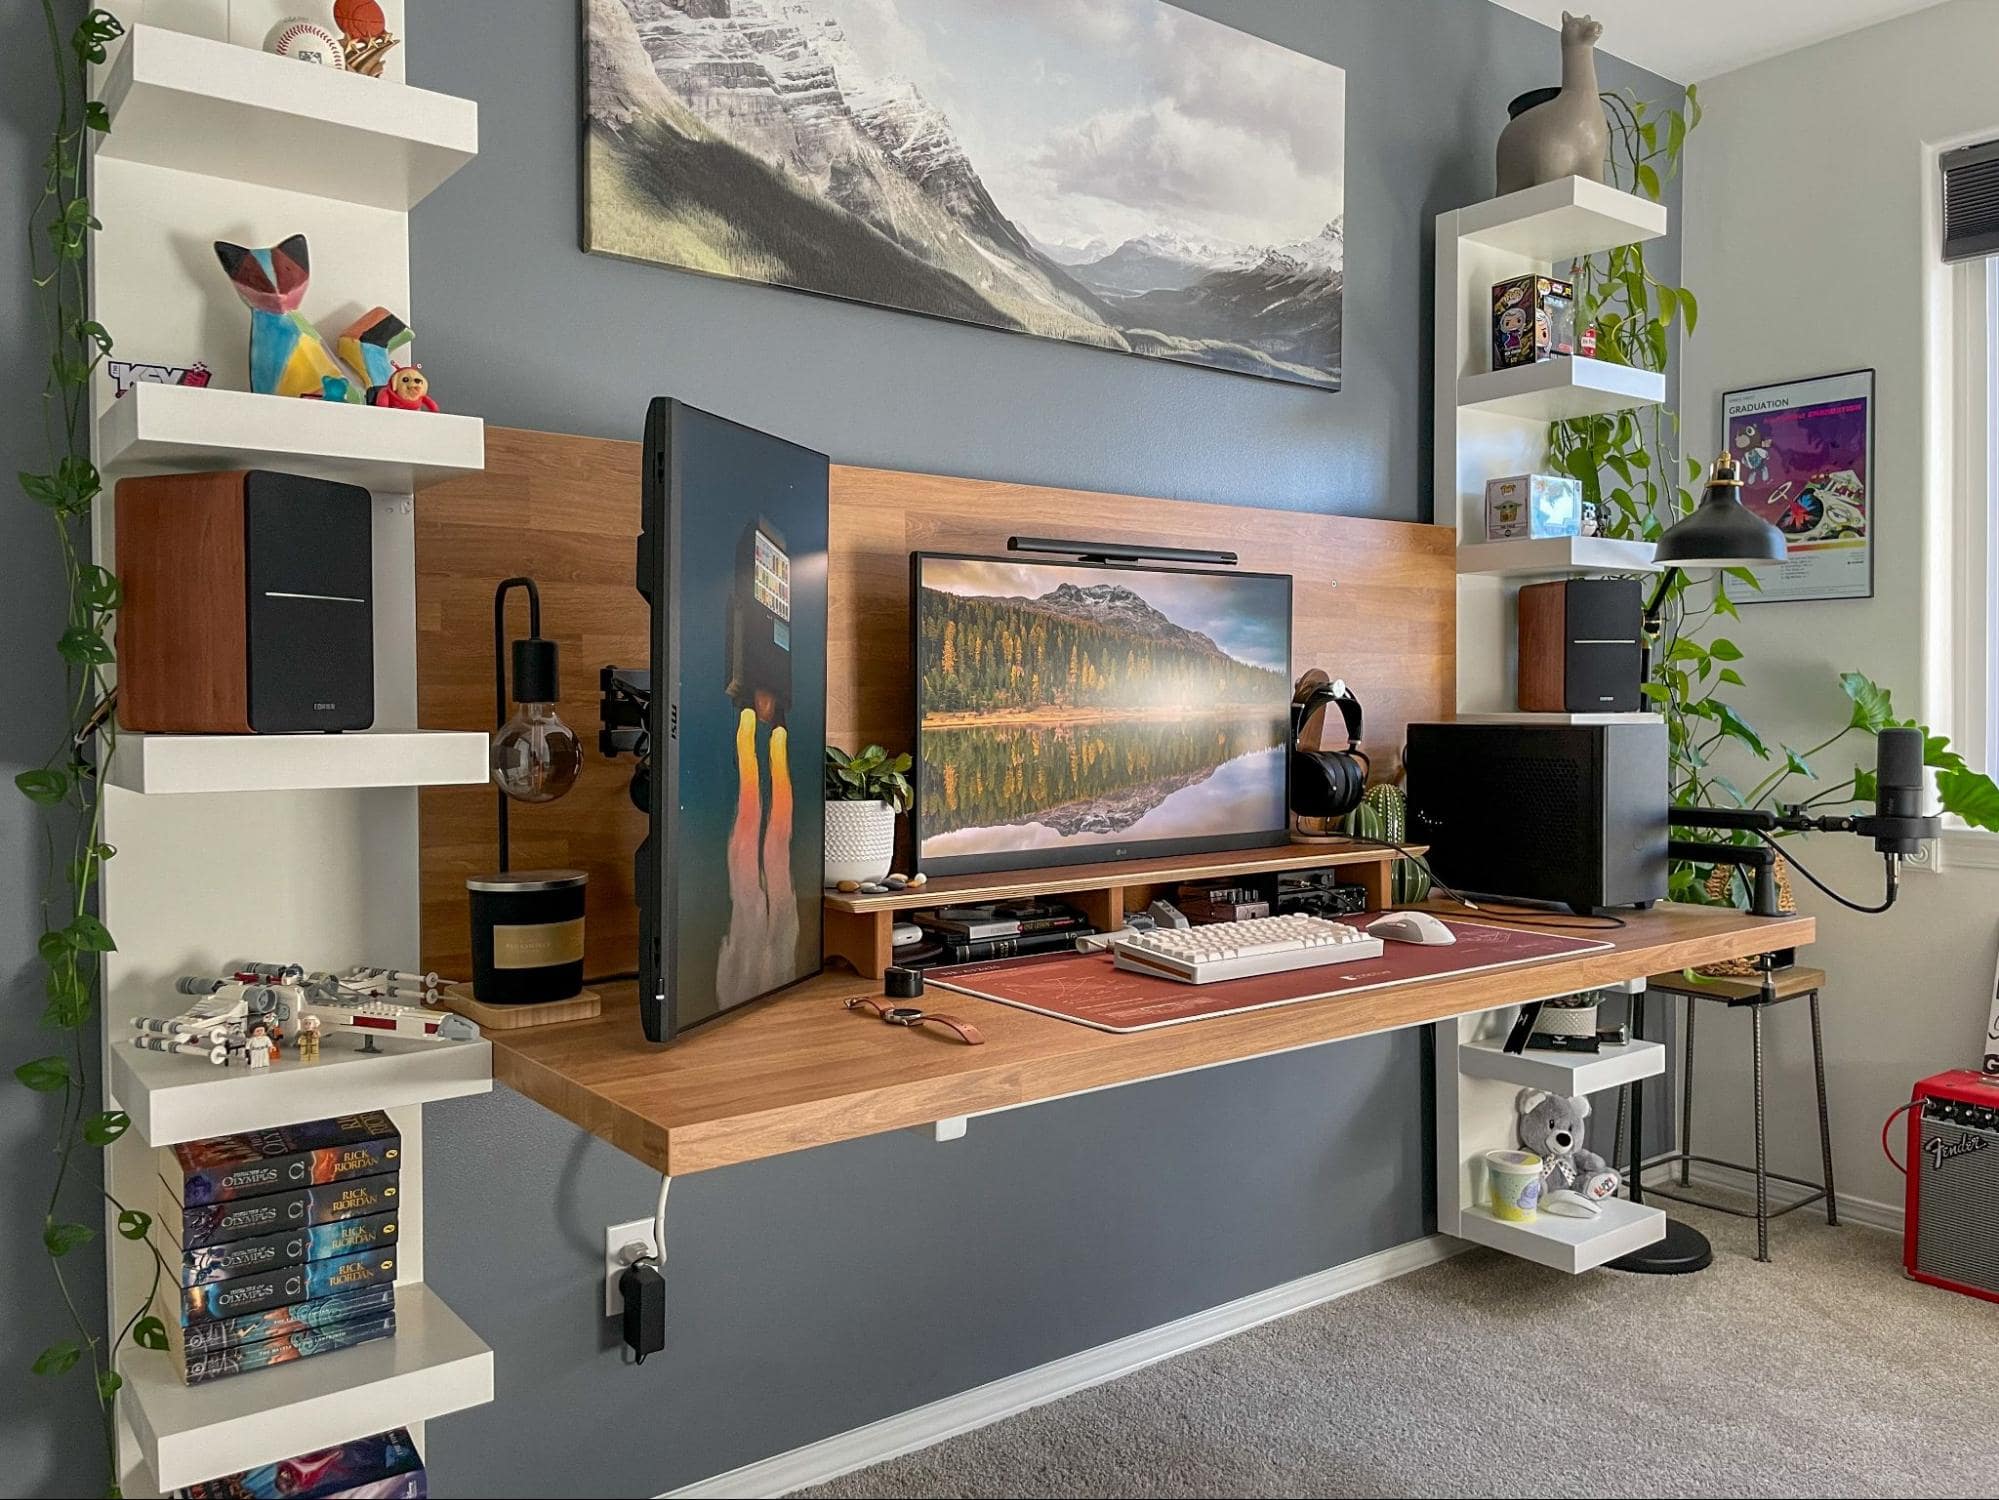 A stylish home office featuring a large wooden desk with dual monitors, a microphone, a mechanical keyboard, and a pair of headphones, flanked by white shelves with playful decor, all set against a grey wall with mountain canvas art